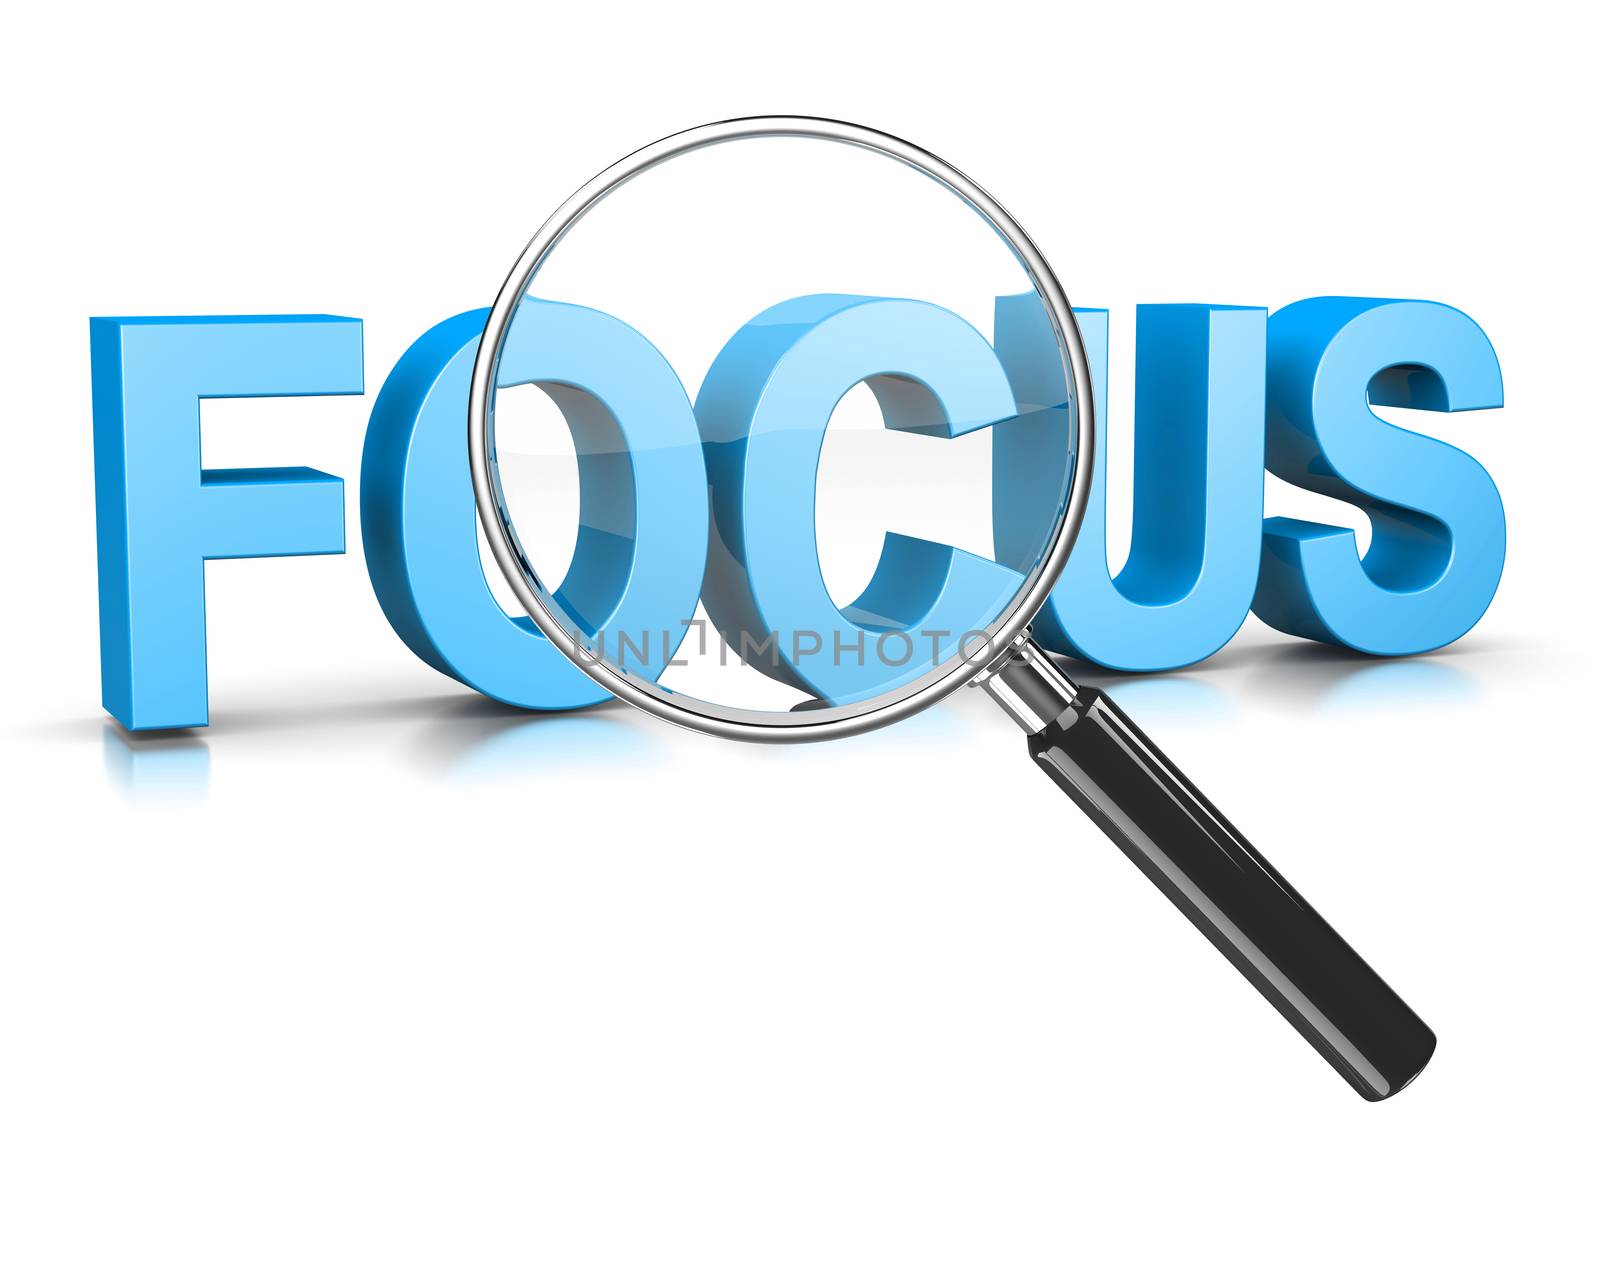 Magnifier Focus Text by make